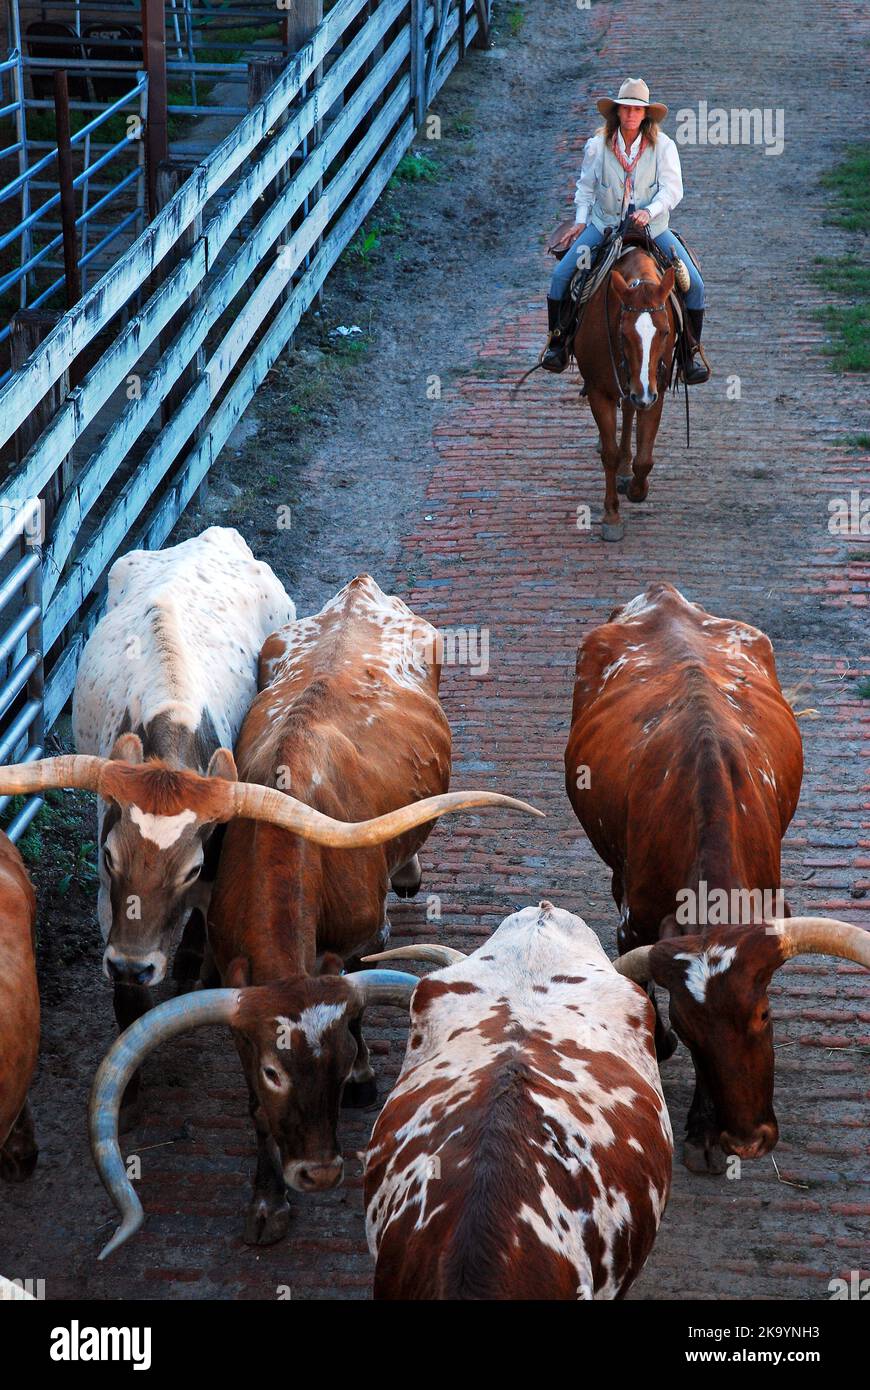 A young Cowgirl herds Texas Longhorns into Their Pens in the Fort Worth Stock Yards Stock Photo